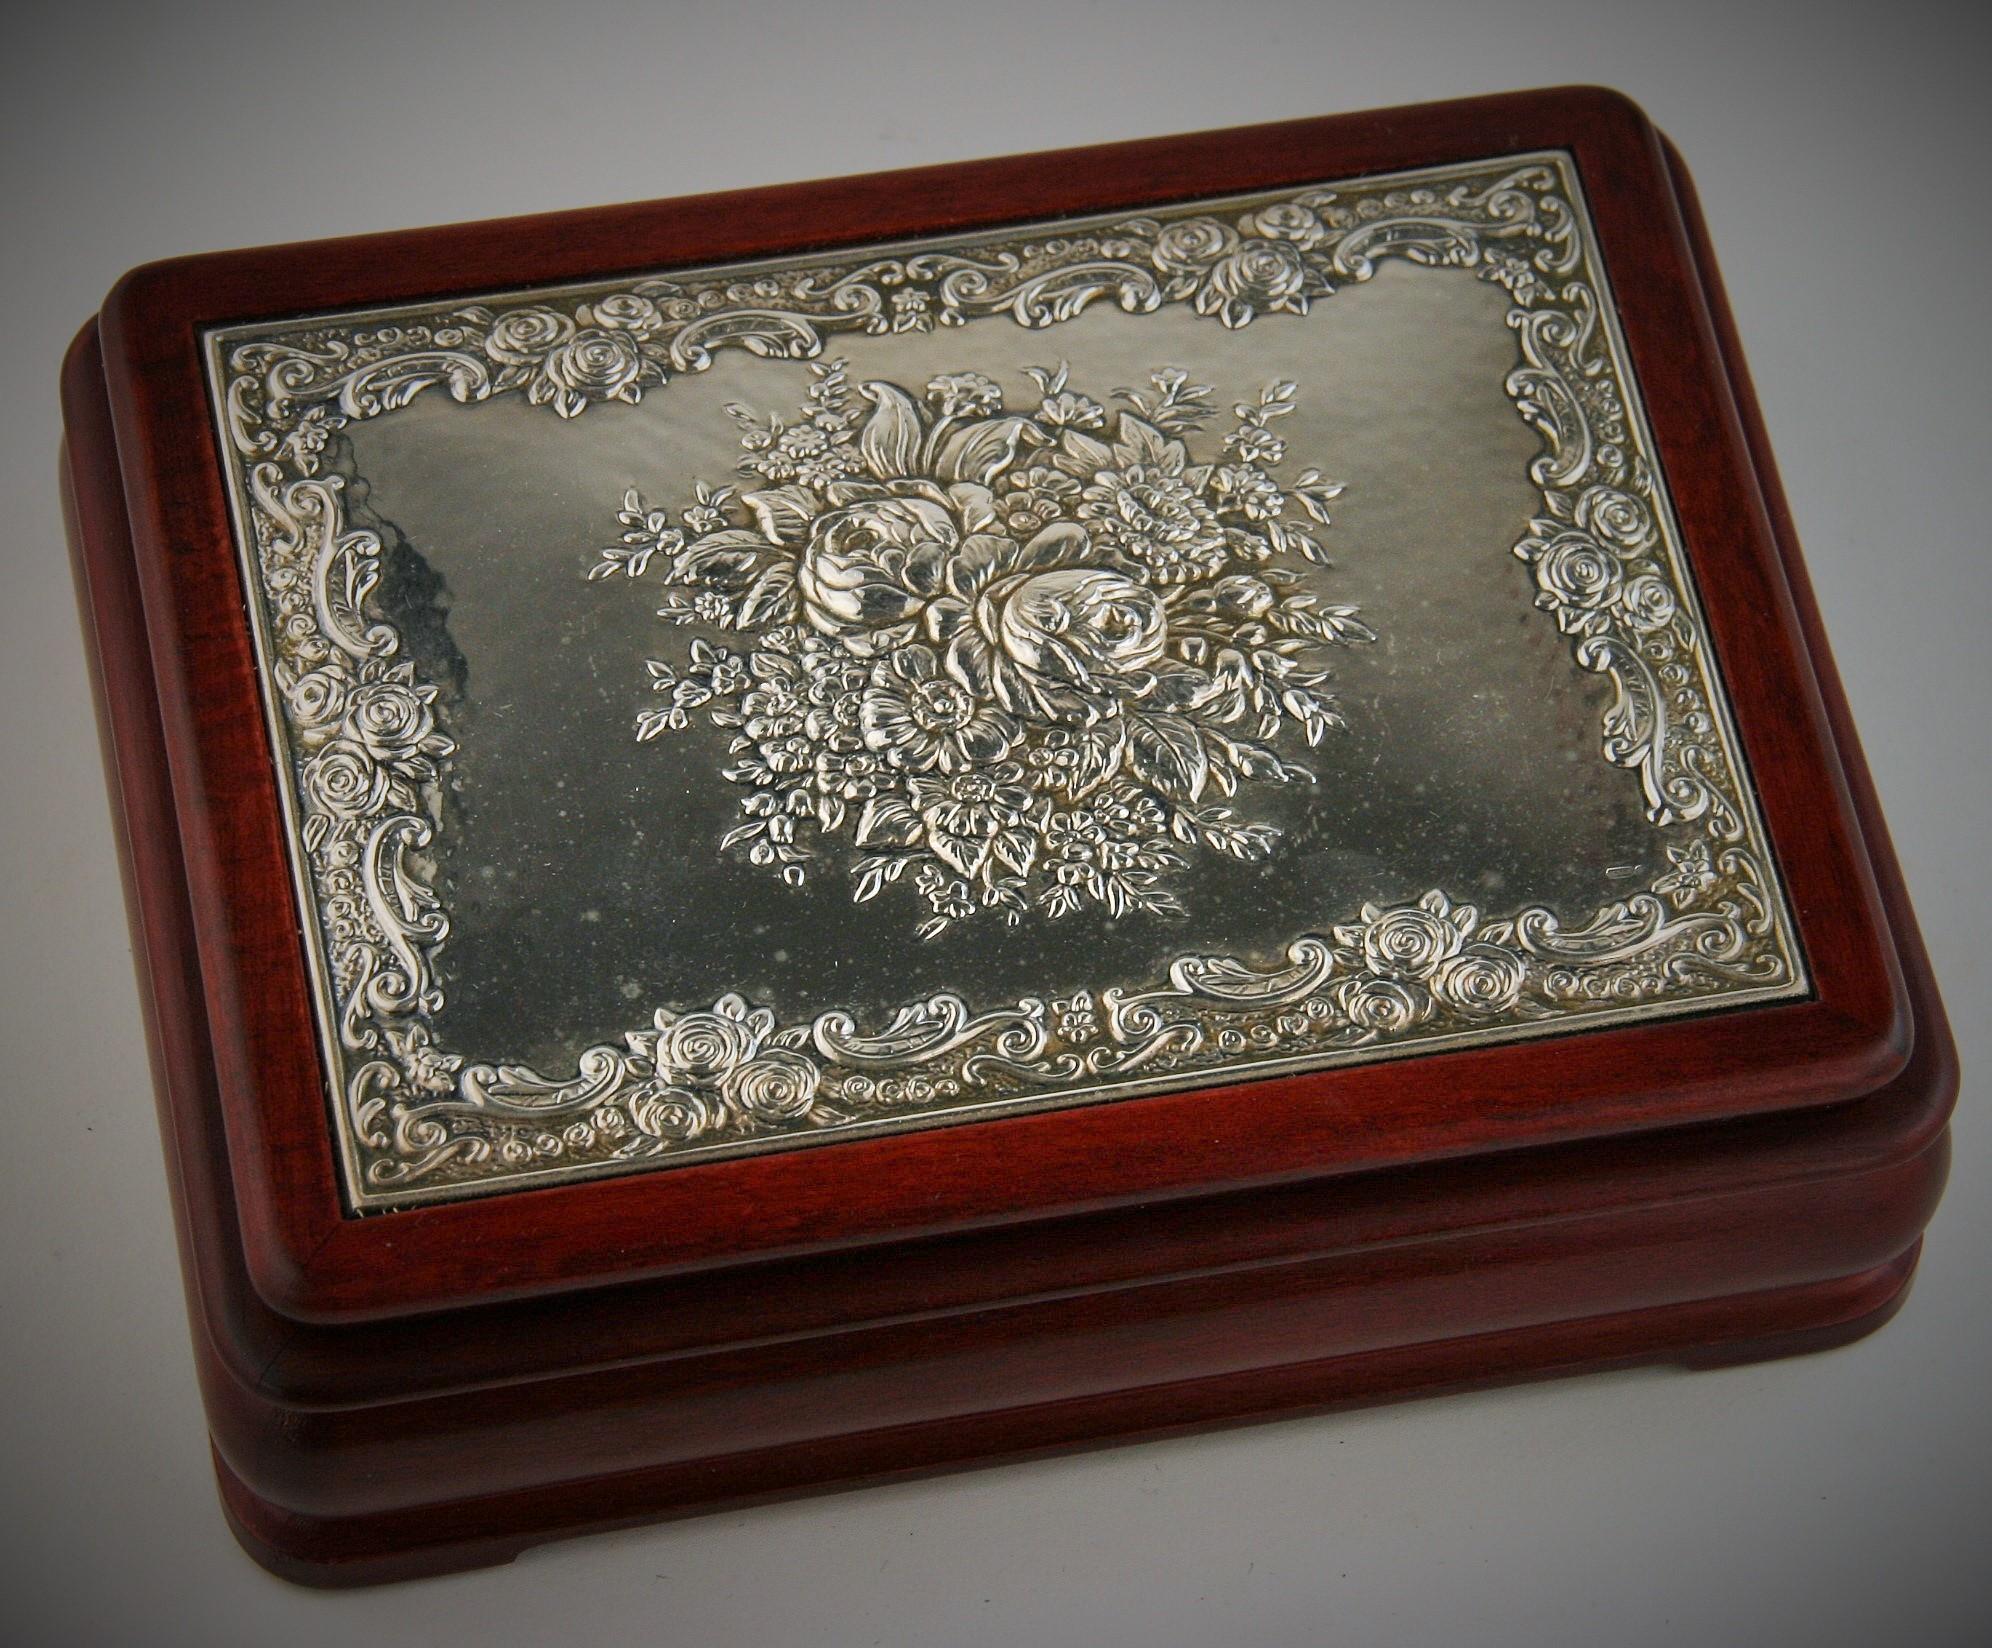 8-246 Italian wood jewelry box with silvered floral design top.
Red velvet interior with place for rings or cufflinks
Silver plaque signed Ricardi.